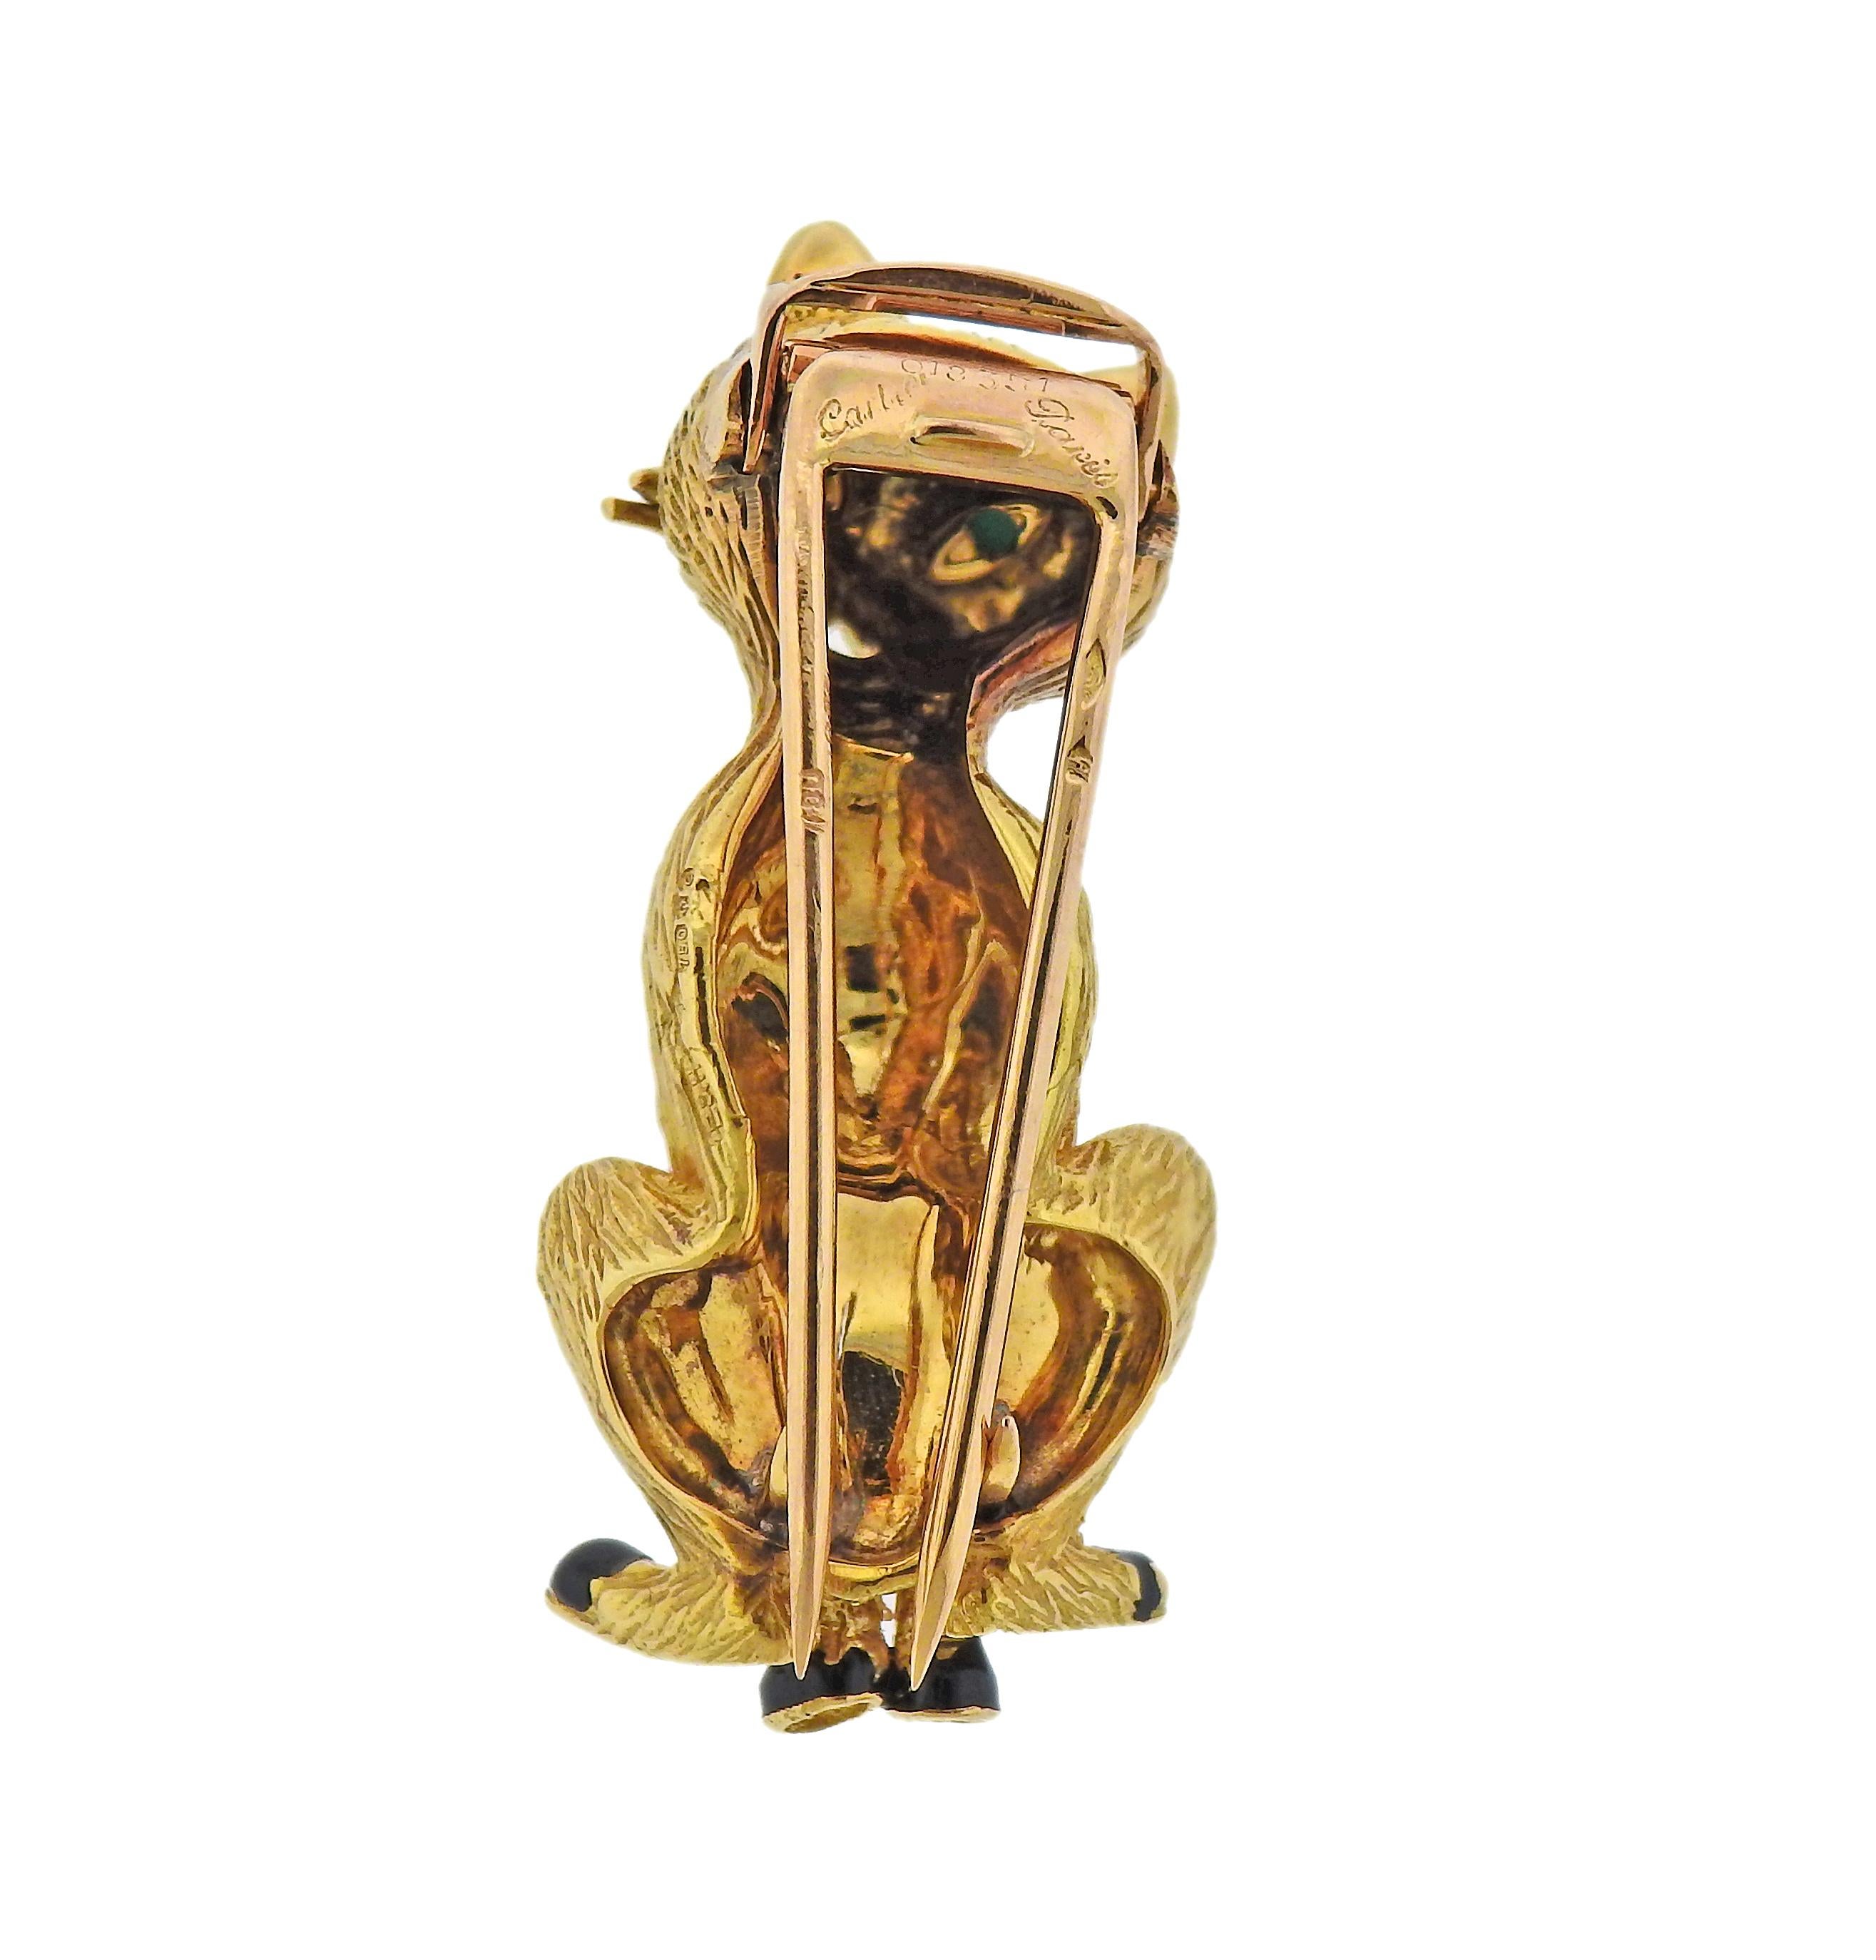 Cartier Paris 18k gold cat brooch, set with black enamel and turquoise eyes. Cat is 40mm x 20mm. Minor chips on enamel are presetn. Marked: Cartier Paris, 018 331, French marks. Weight - 17.9 grams. 